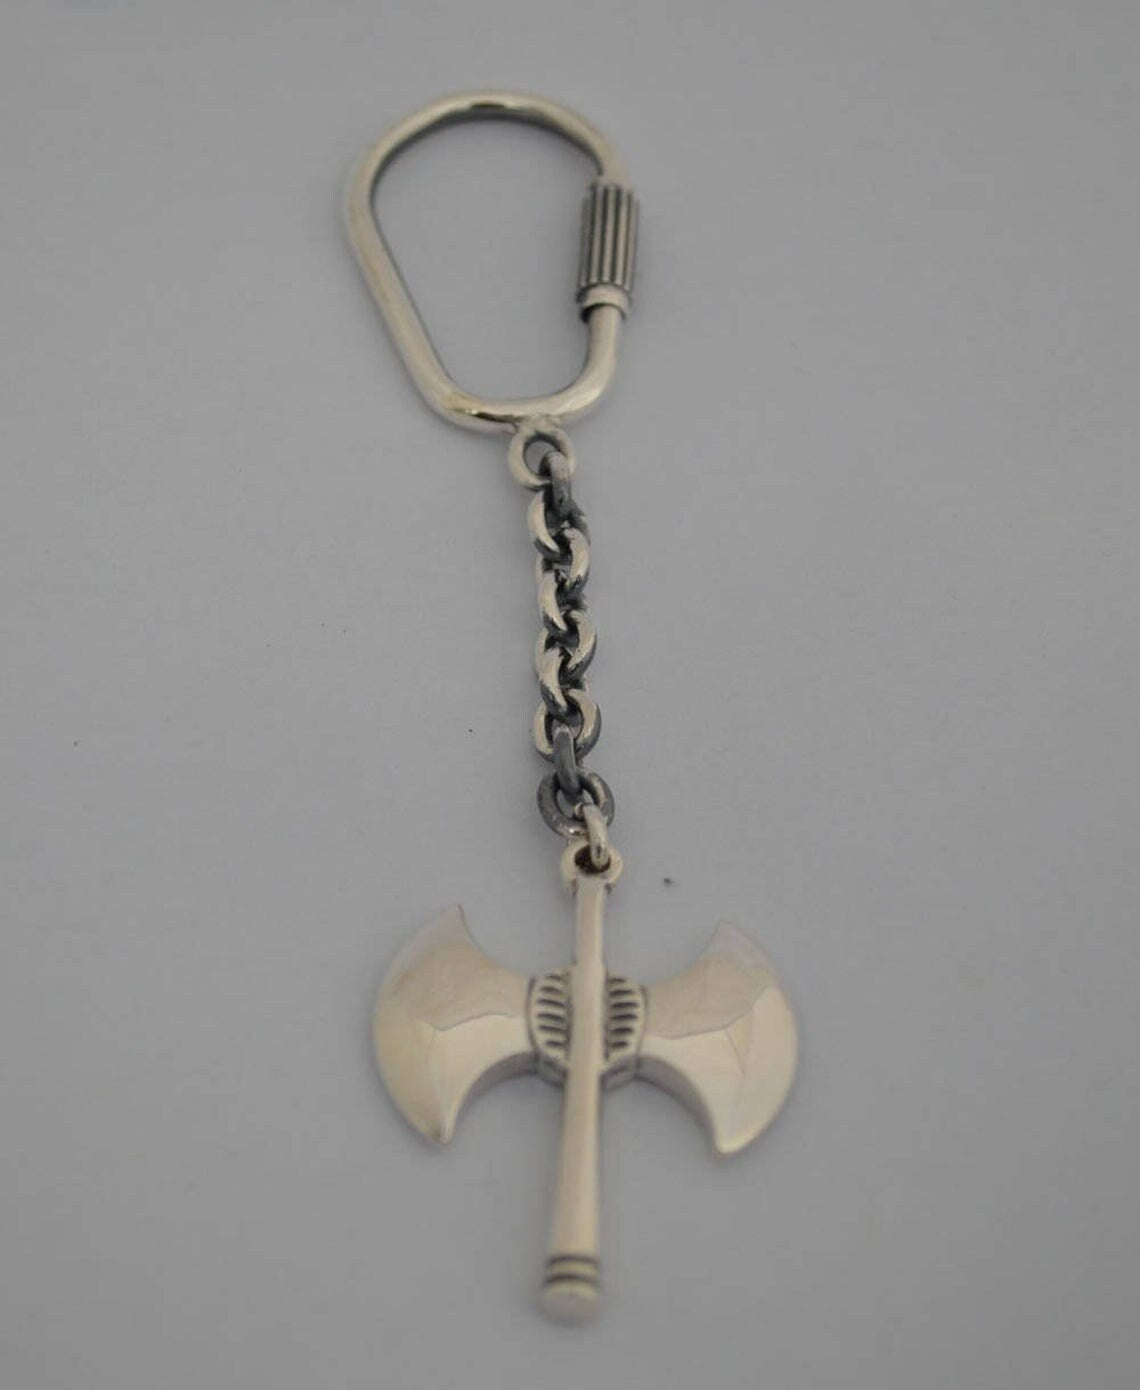 Labrys, Double Headed Axe - Minoan Sacred Symbol - Ancient Greece - Keychain - 925 Sterling Silver